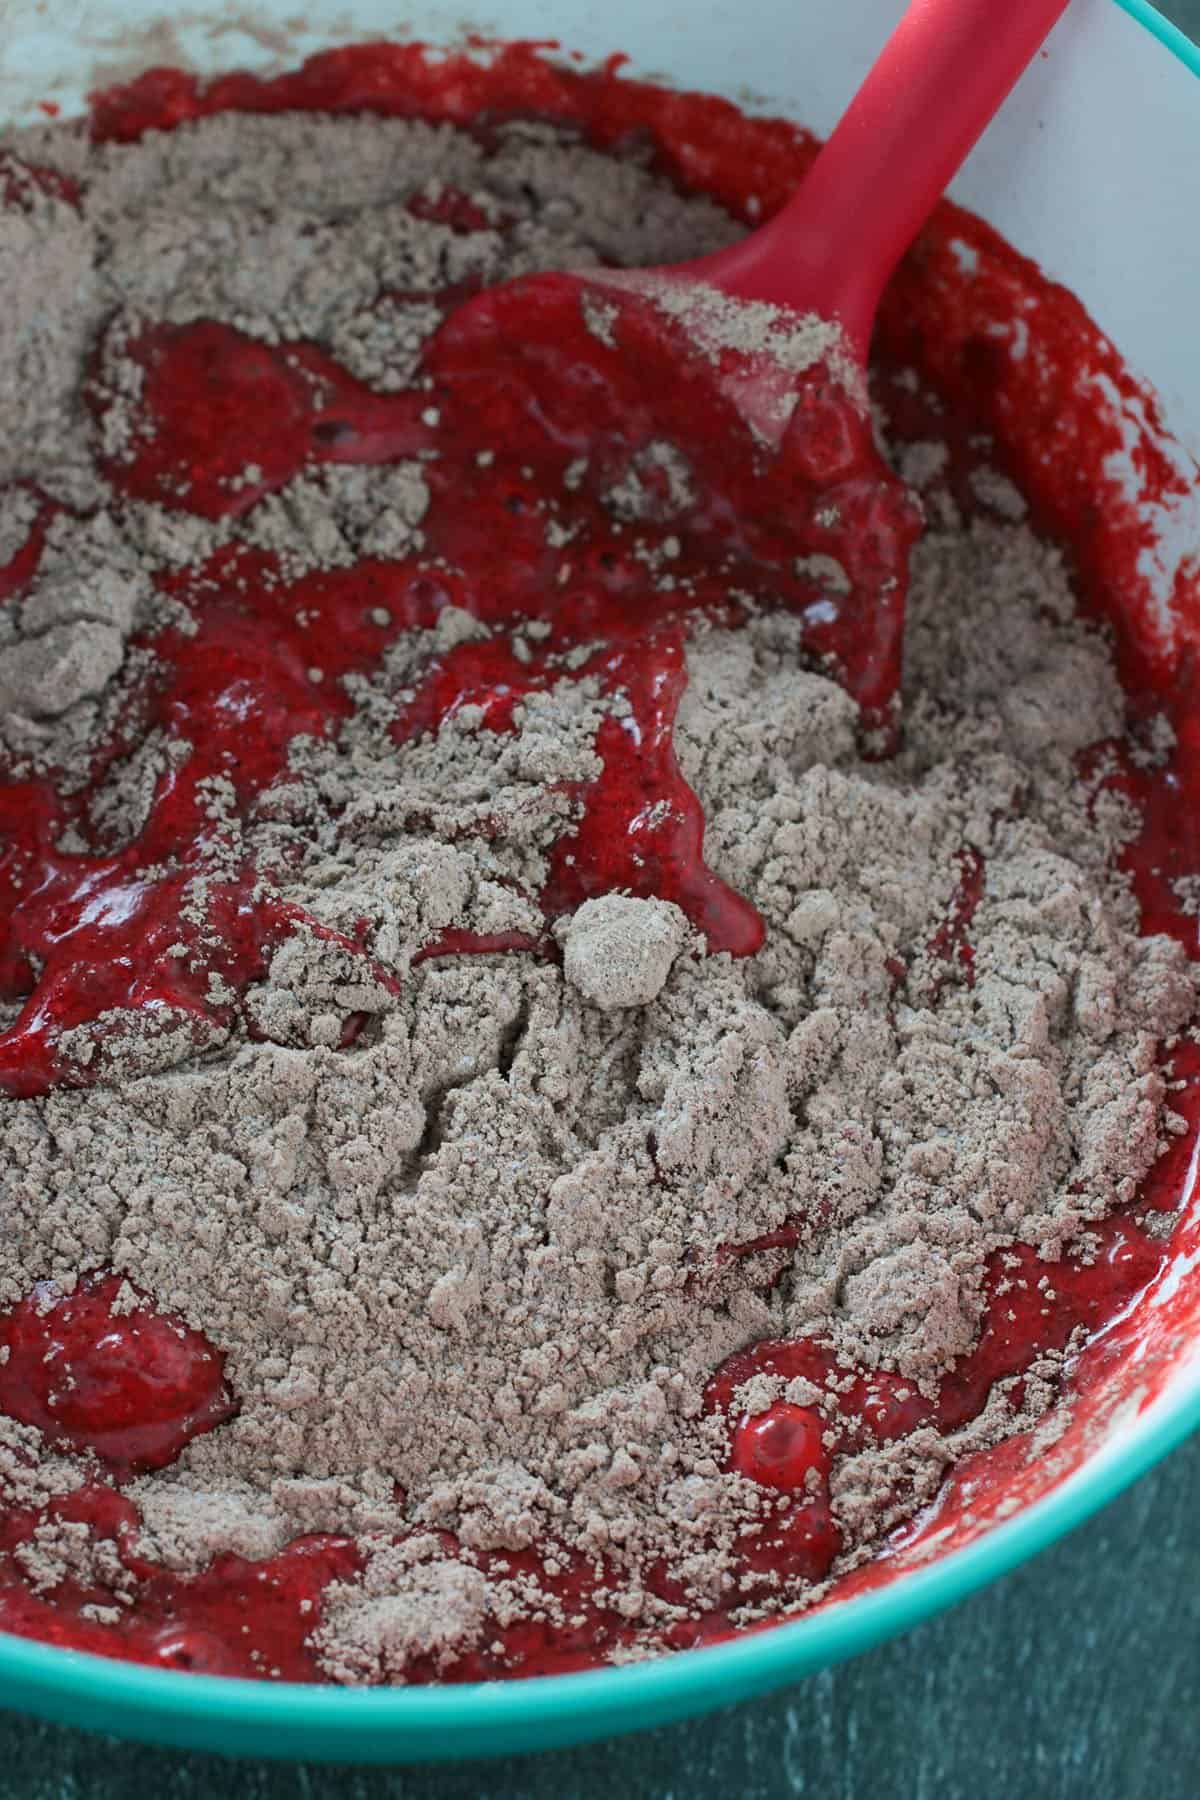 Stirring together the wet and dry mixtures to make the red velvet sheet cake batter.